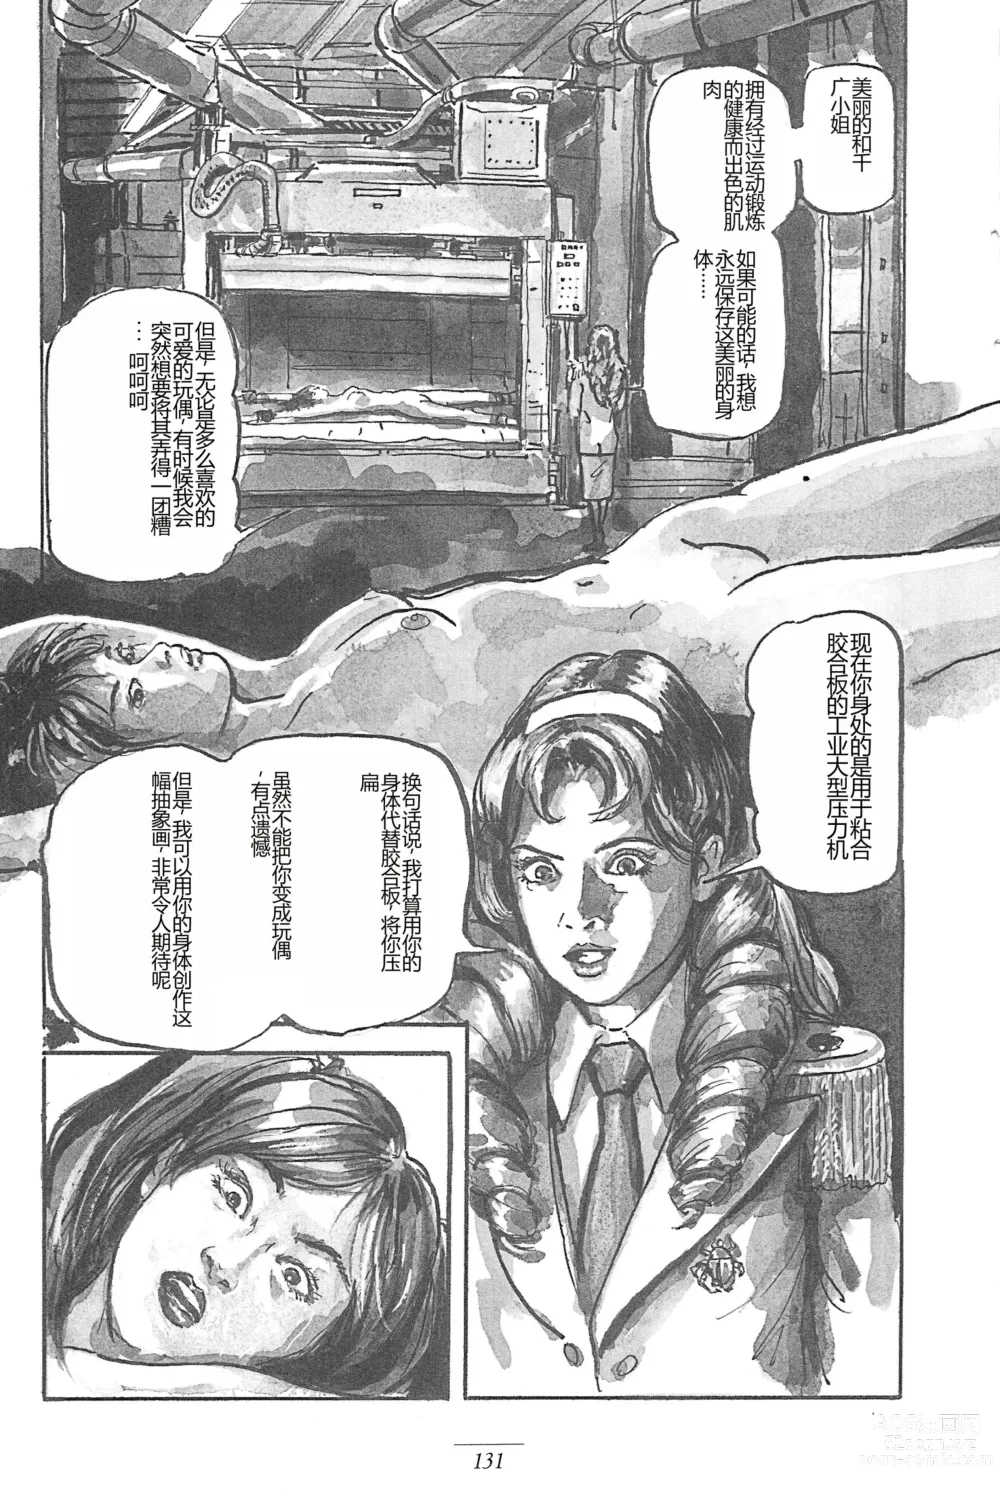 Page 9 of manga Girl Detective Team part 4 「Dream Girl」